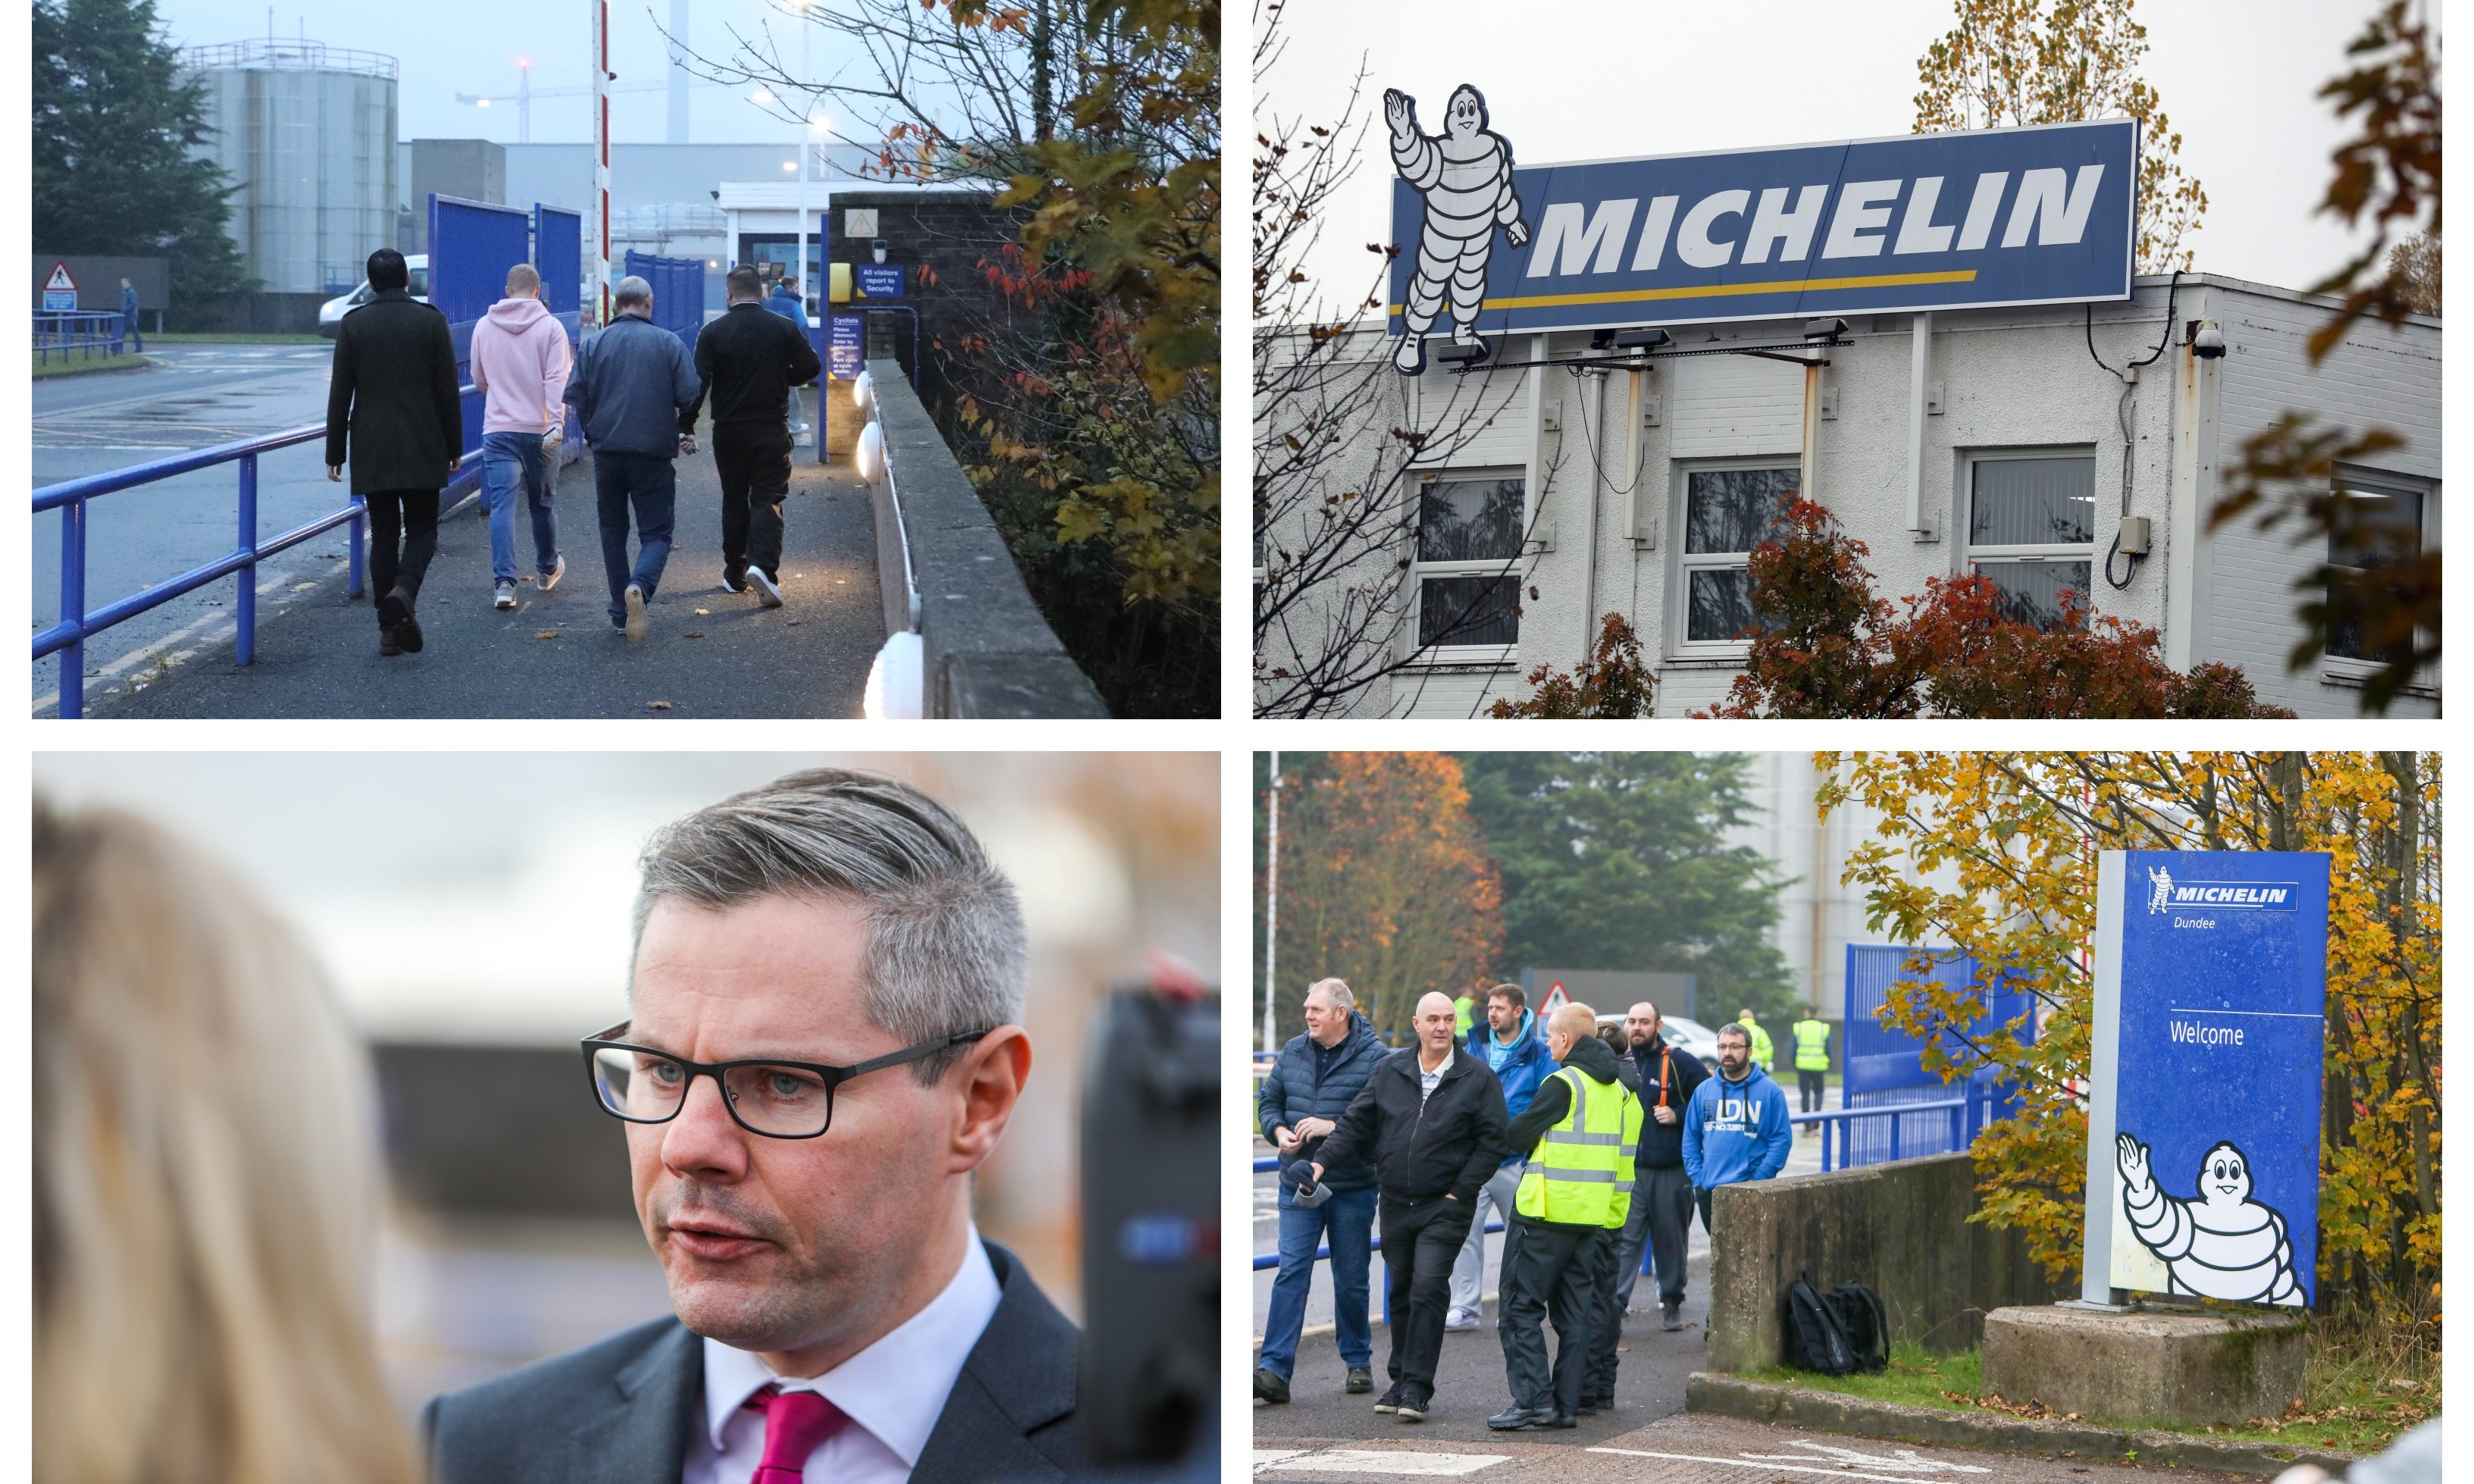 Michelin officially announced its closure 'by 2020' to staff in Dundee on Tuesday, November 6.